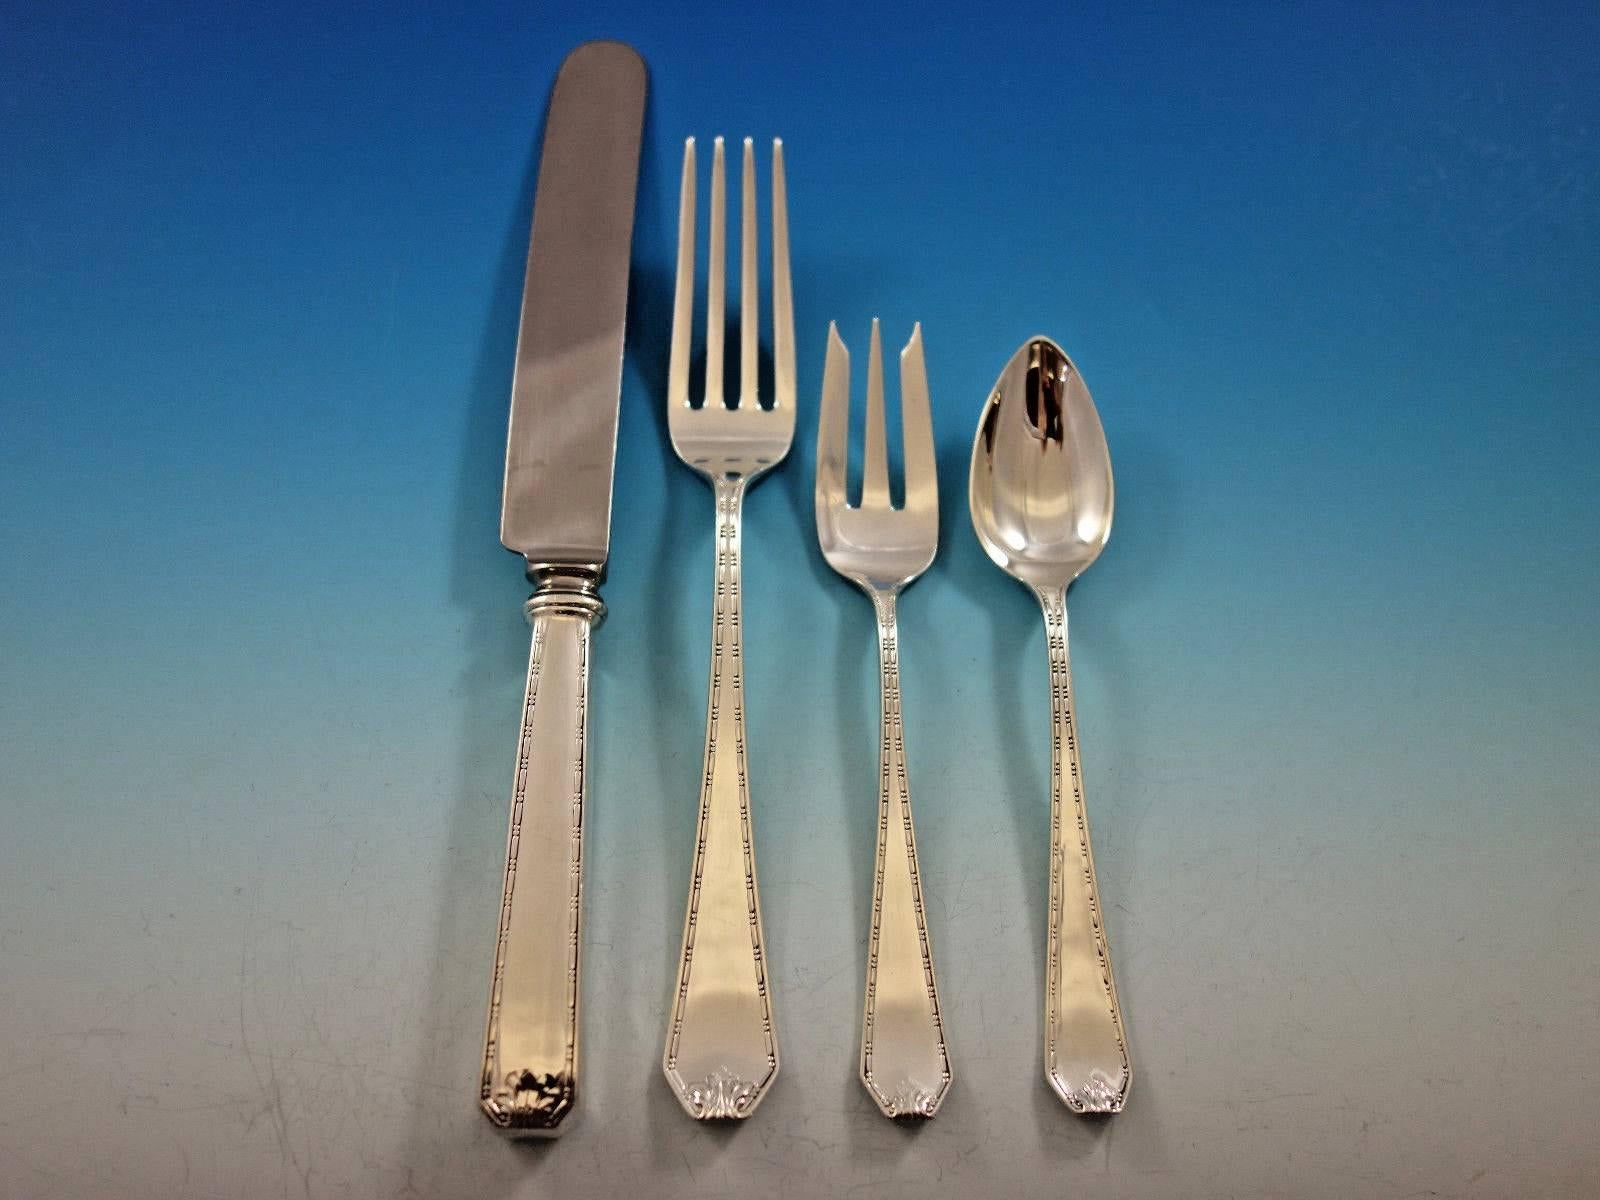 Dinner size Madam Morris by Whiting sterling silver flatware set of 33 pieces. This set includes: 

Eight dinner size knives, 9 1/2